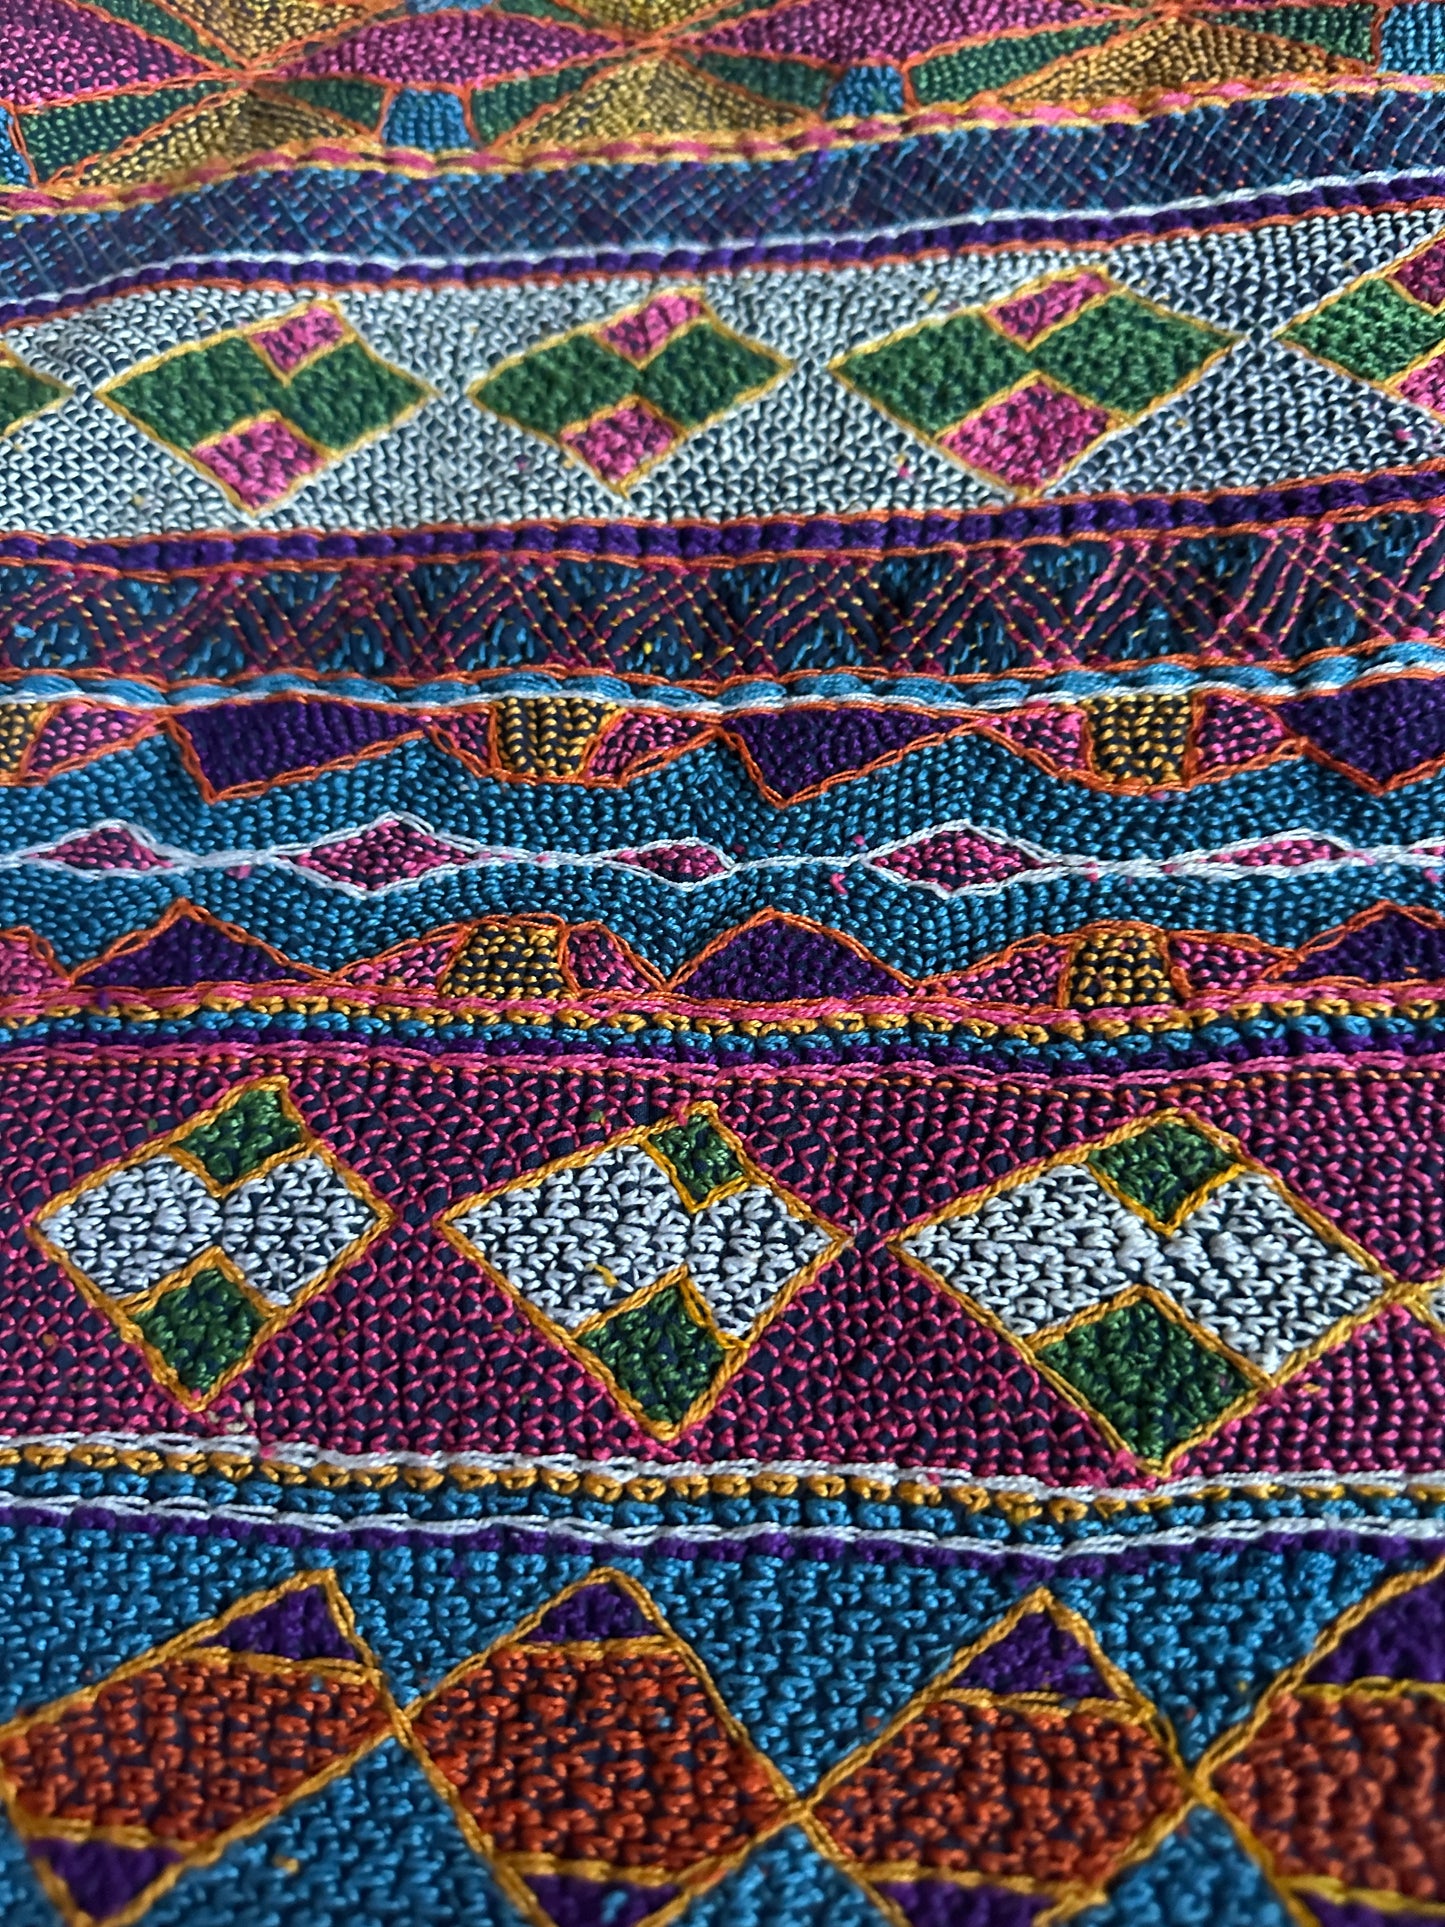 Incredible Rare Antique Embroidered Quilt from the Sindh Valley, Pakistan | Very special Bedcover, curtain, wall hanging or we can make it into an ottoman or headboard for you